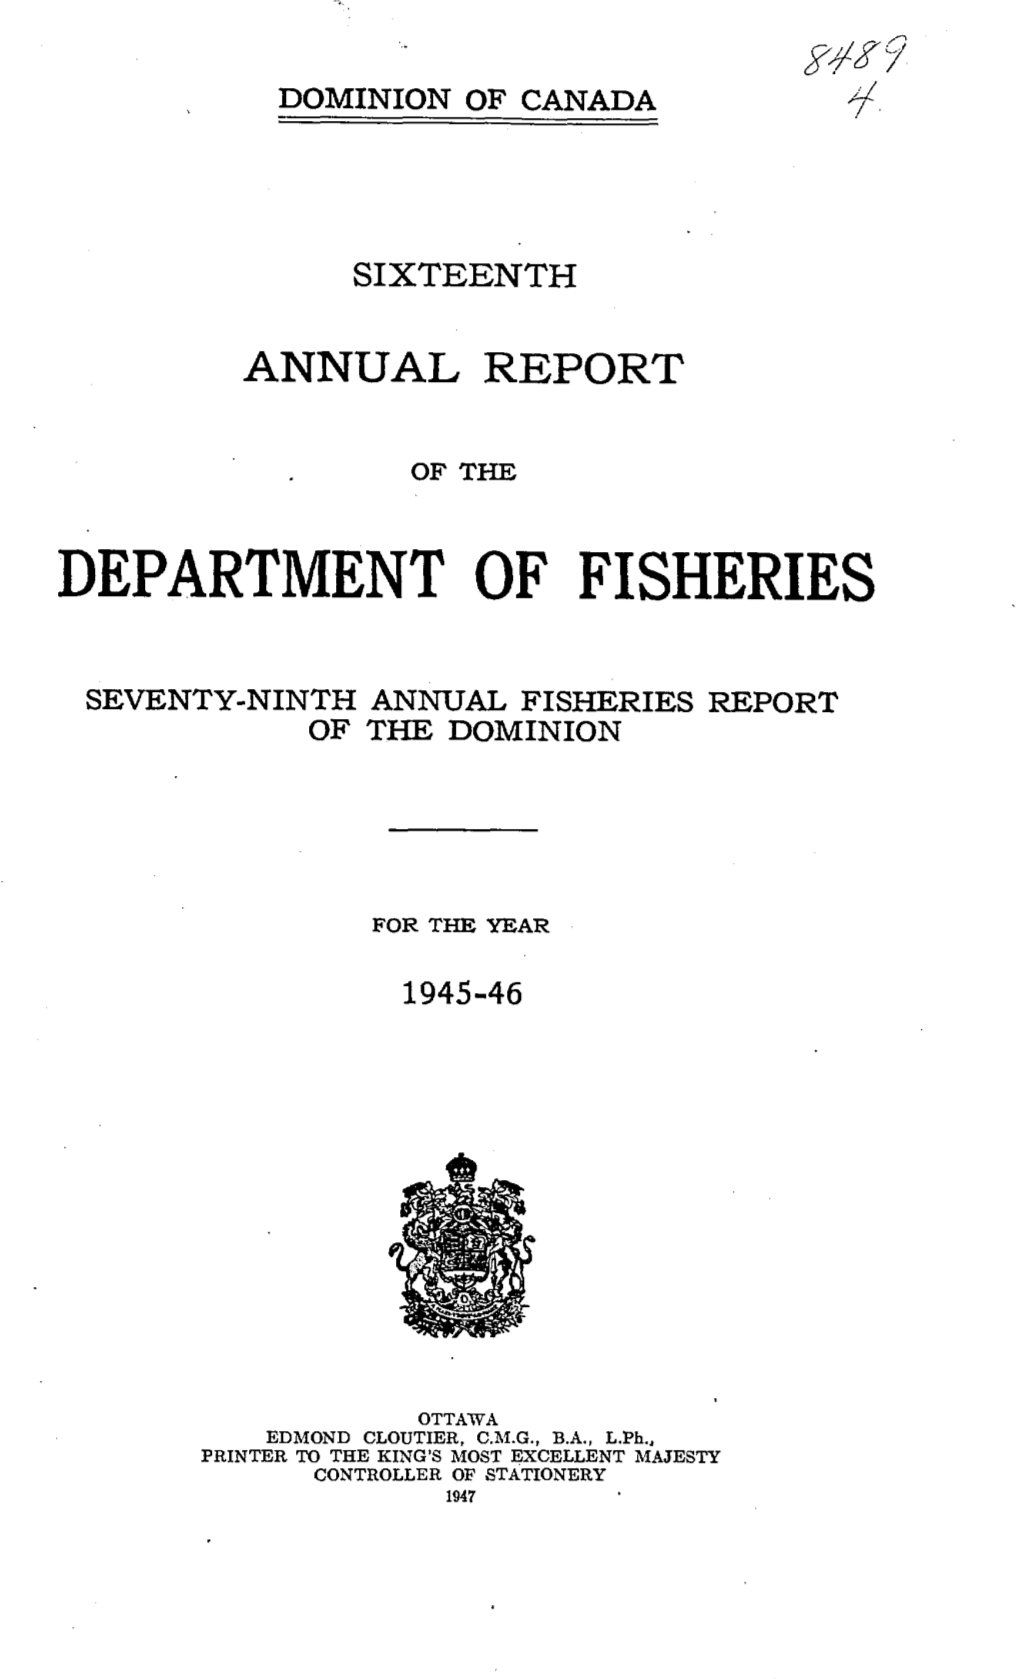 Department of Fisheries